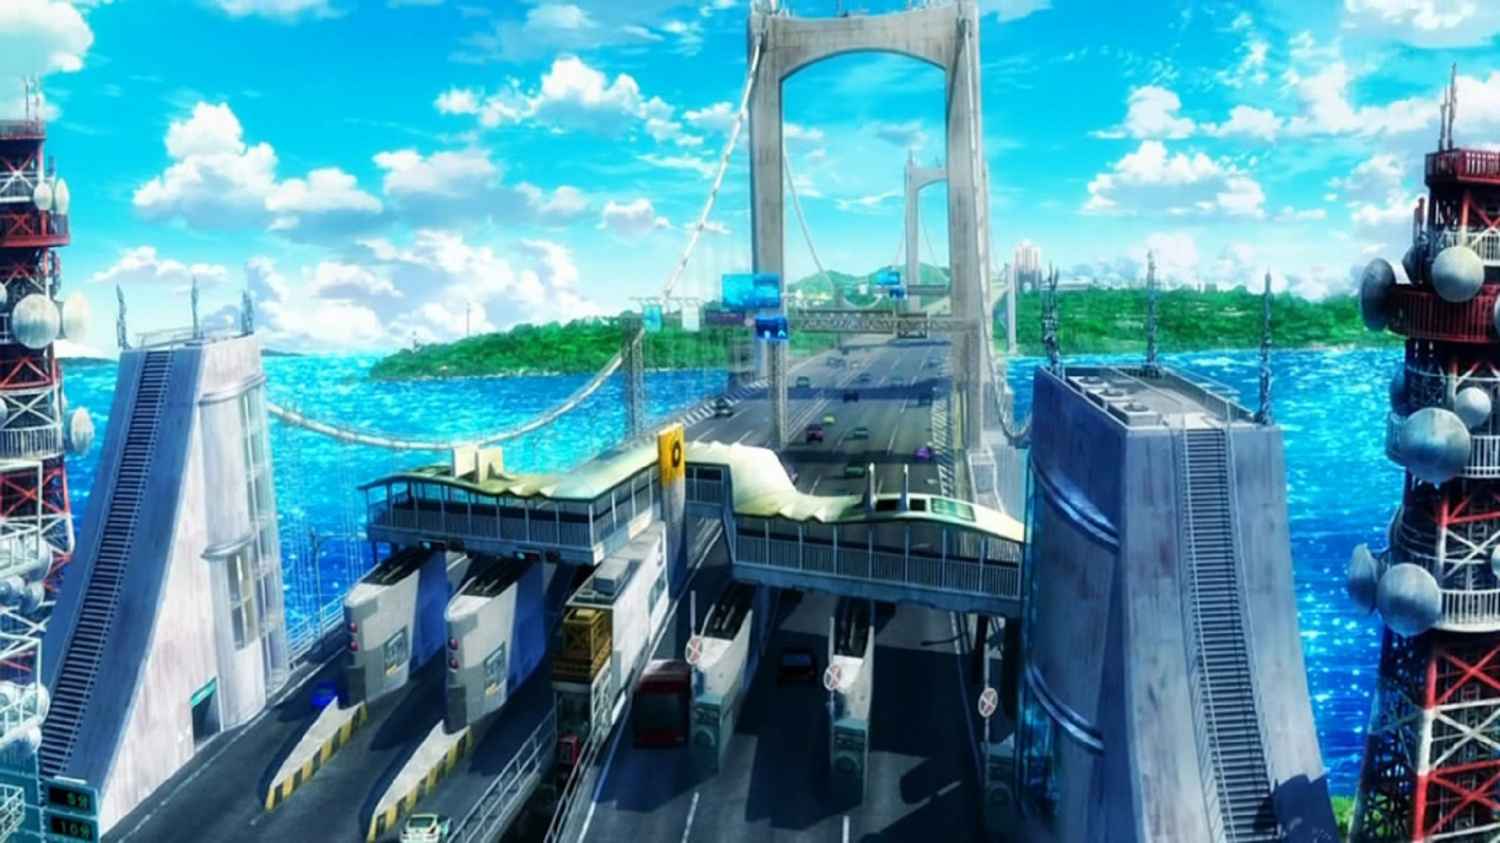 What anime is this scenery from?